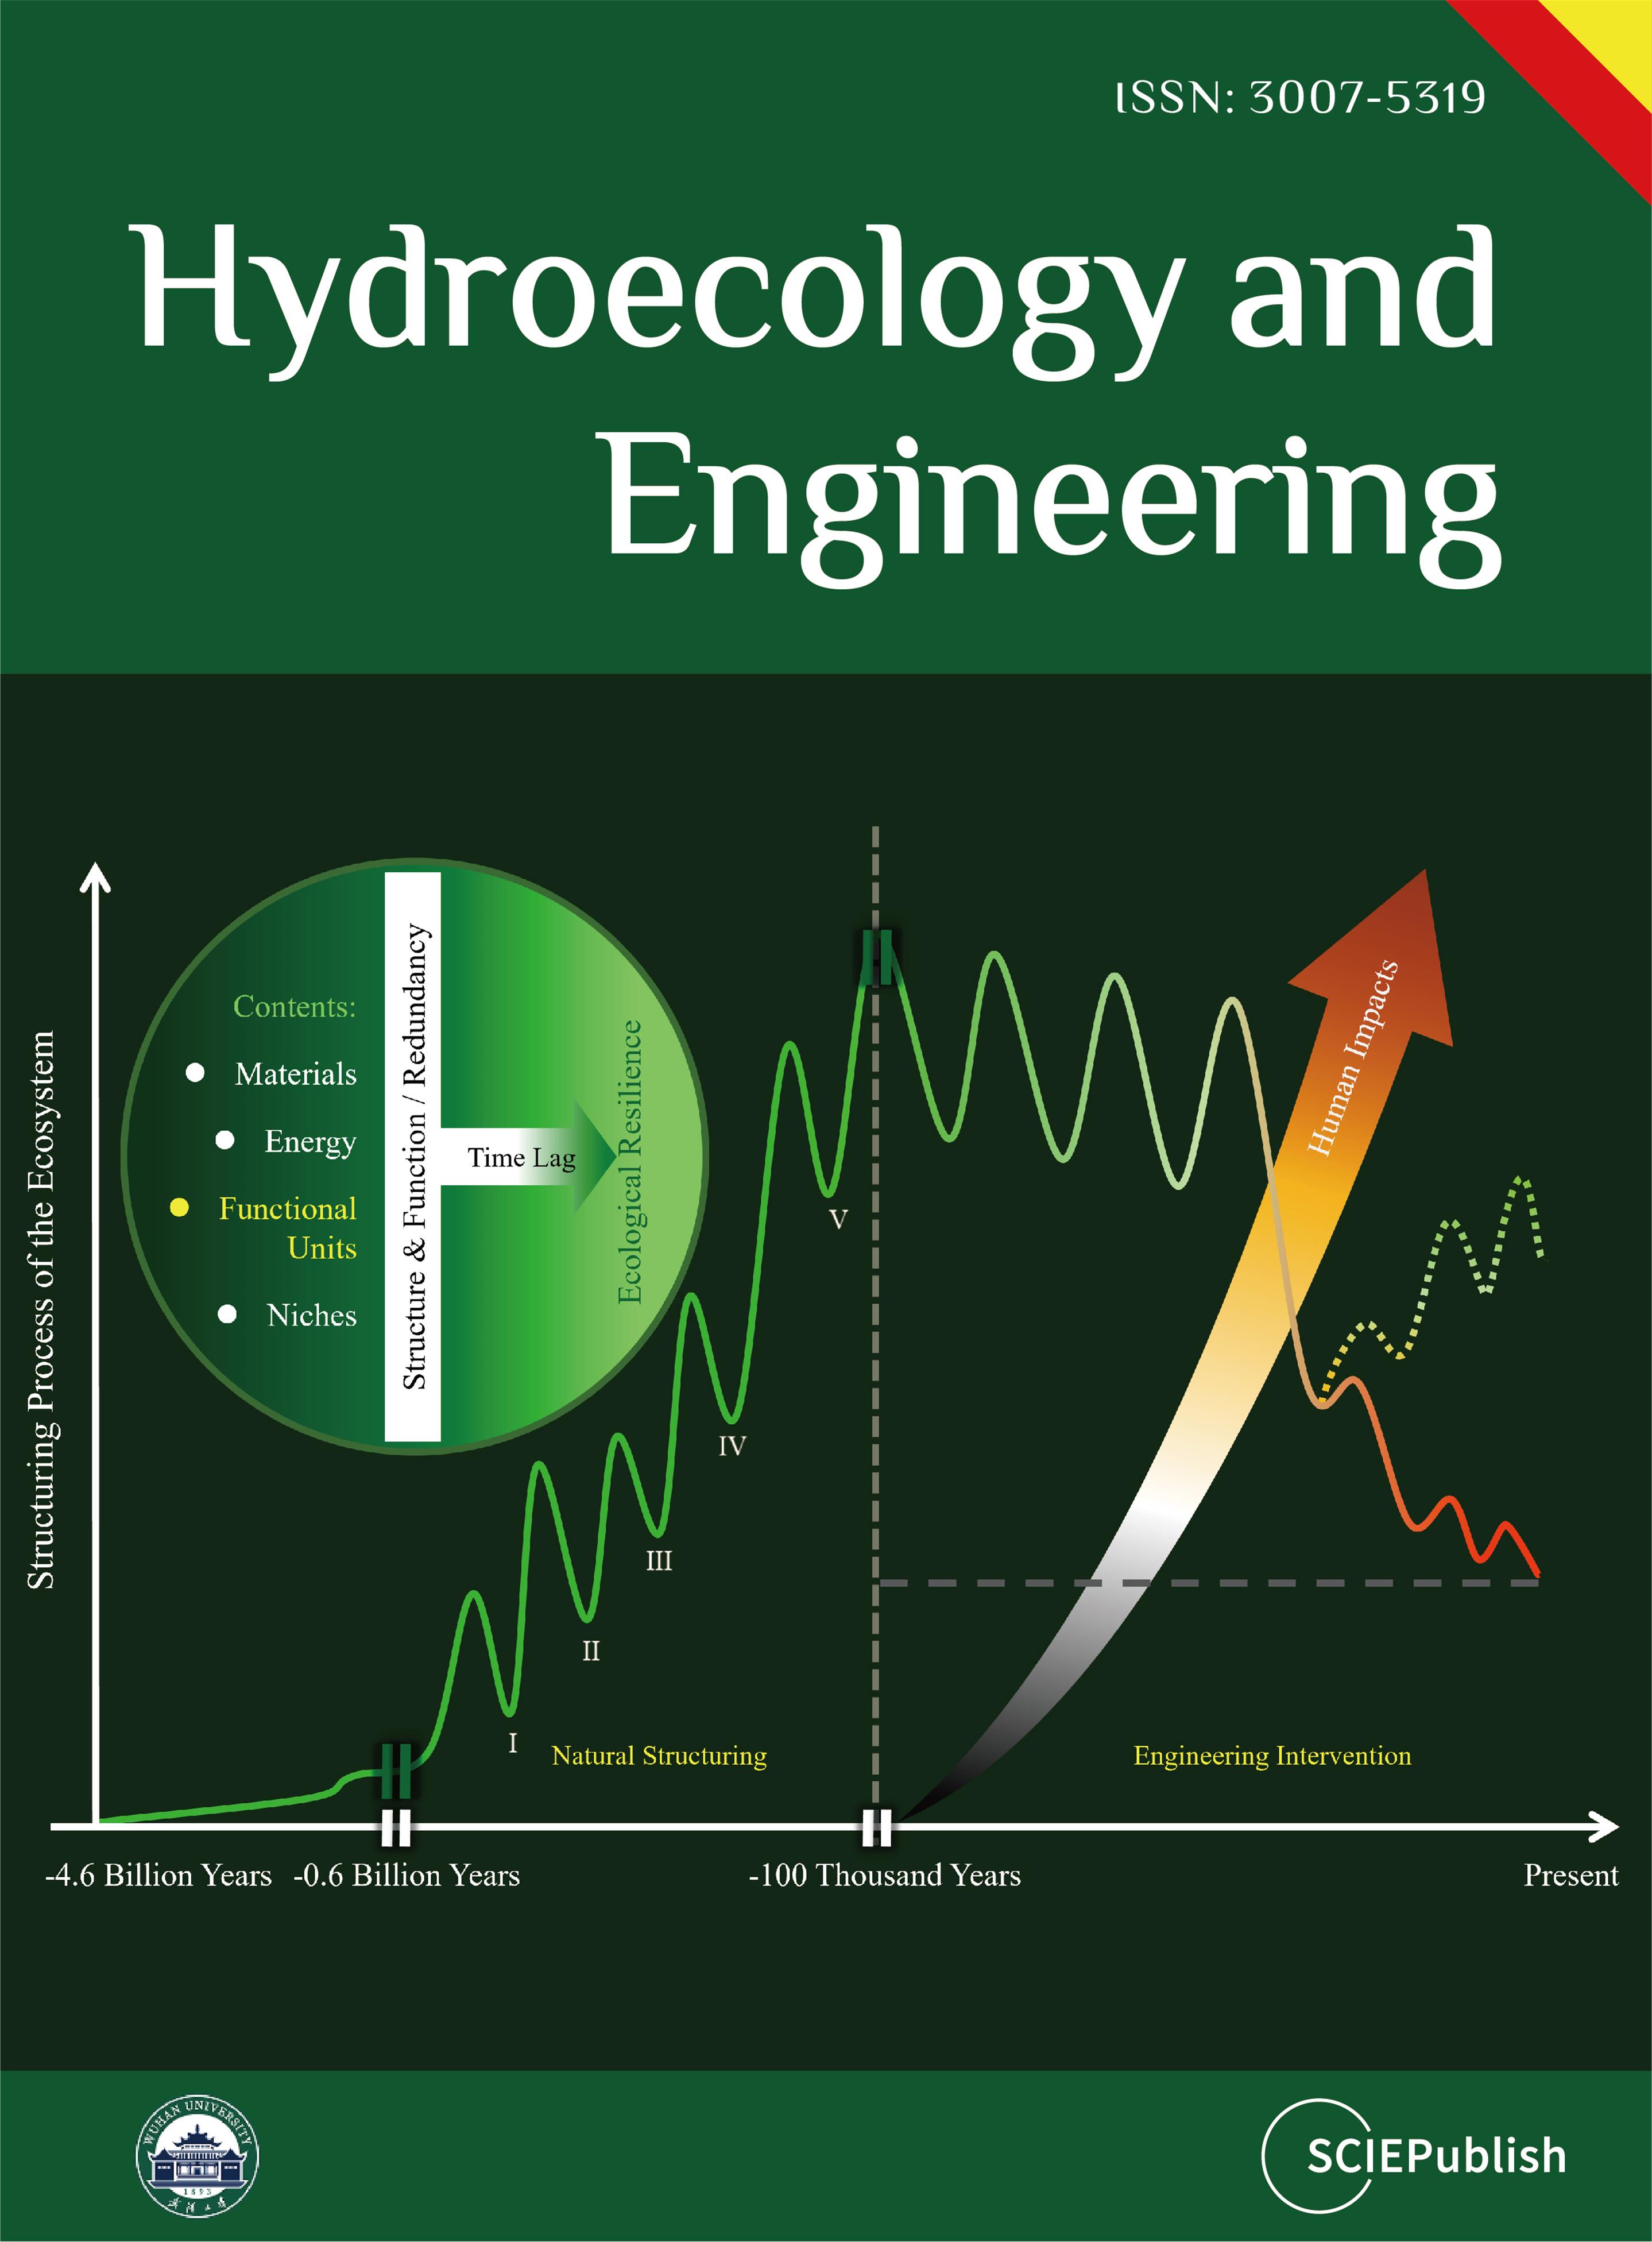 Hydroecology and Engineering-logo